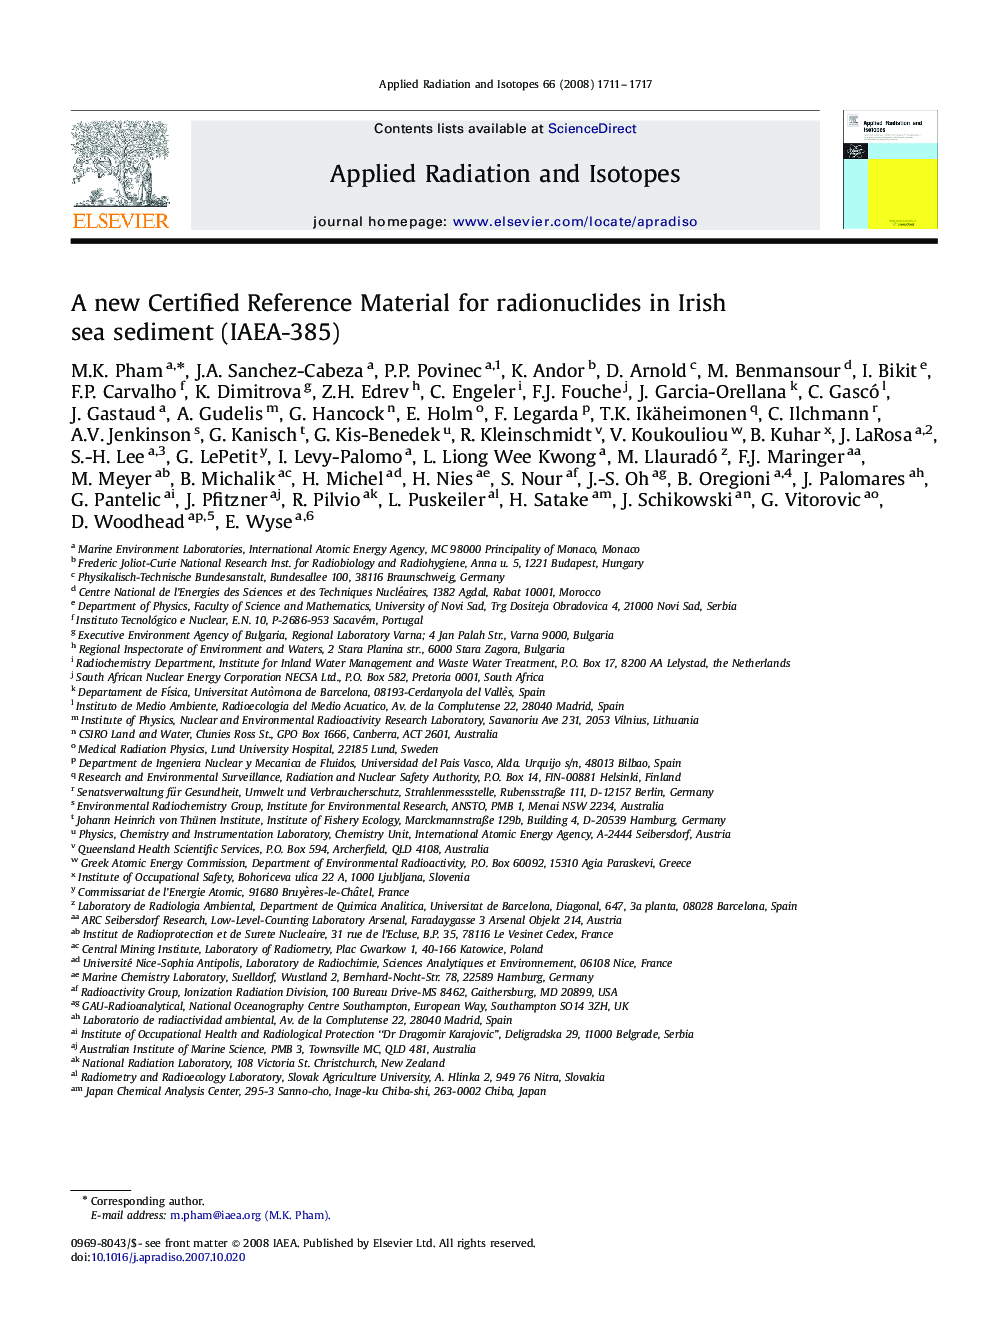 A new Certified Reference Material for radionuclides in Irish sea sediment (IAEA-385)